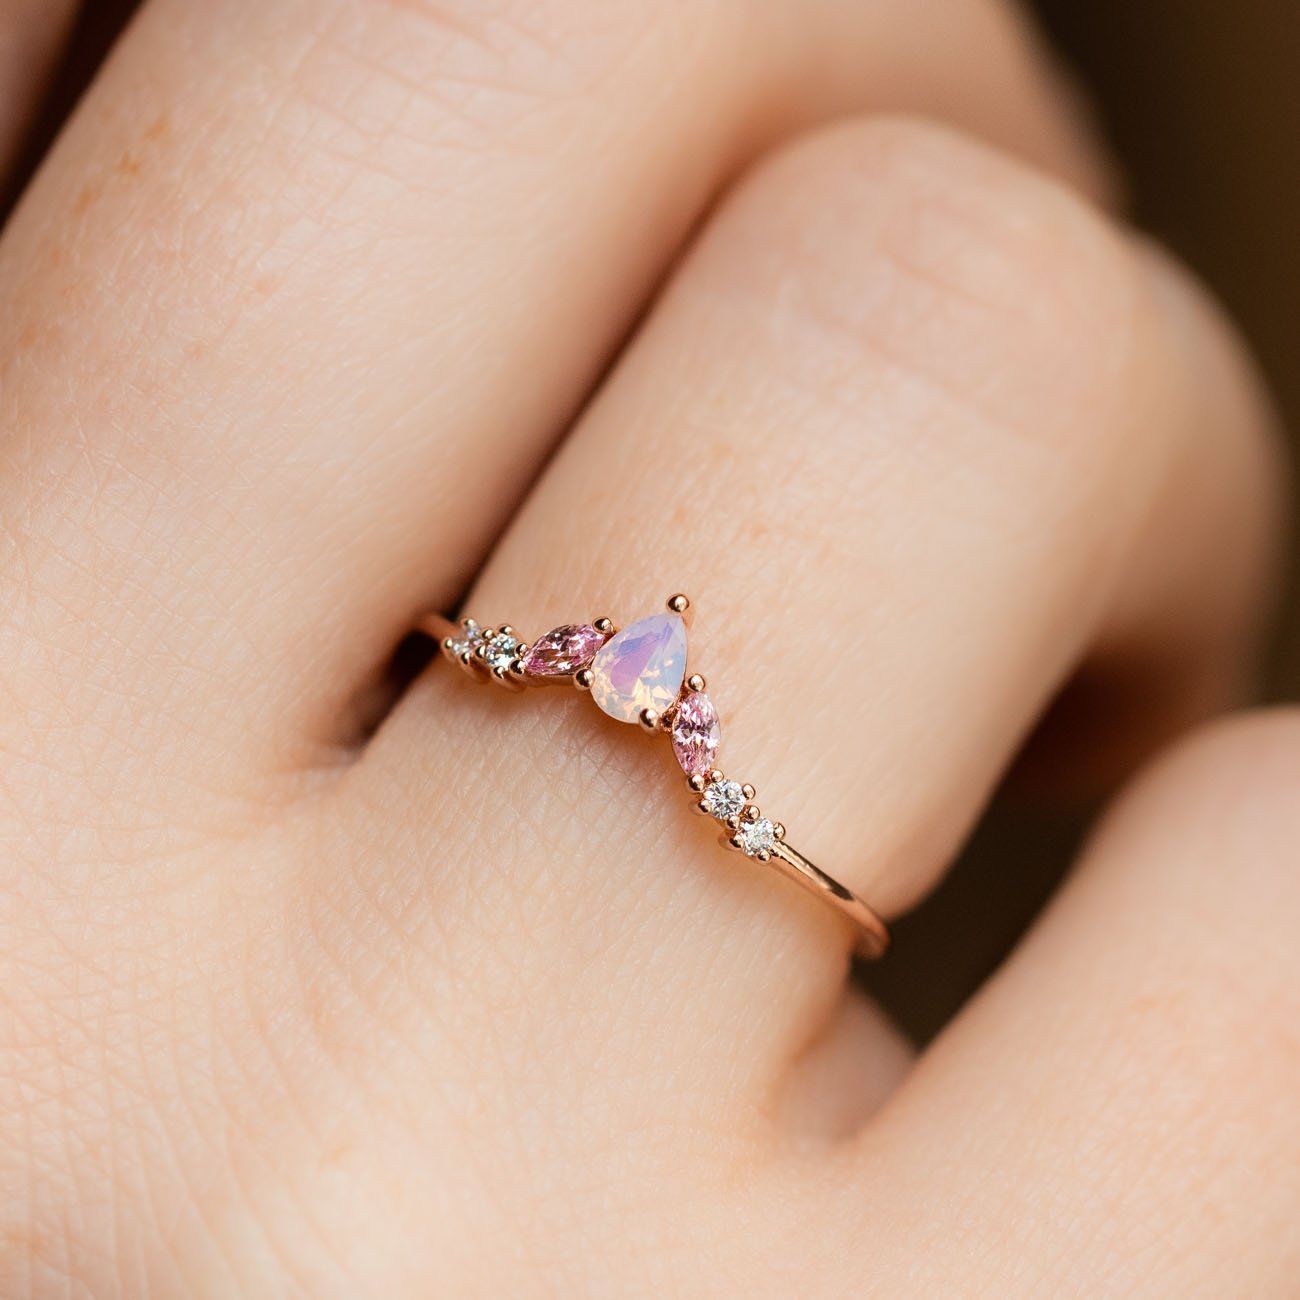 Girls Crew Exclusive Design 18K Rose Gold Pink Opal Dainty Ring